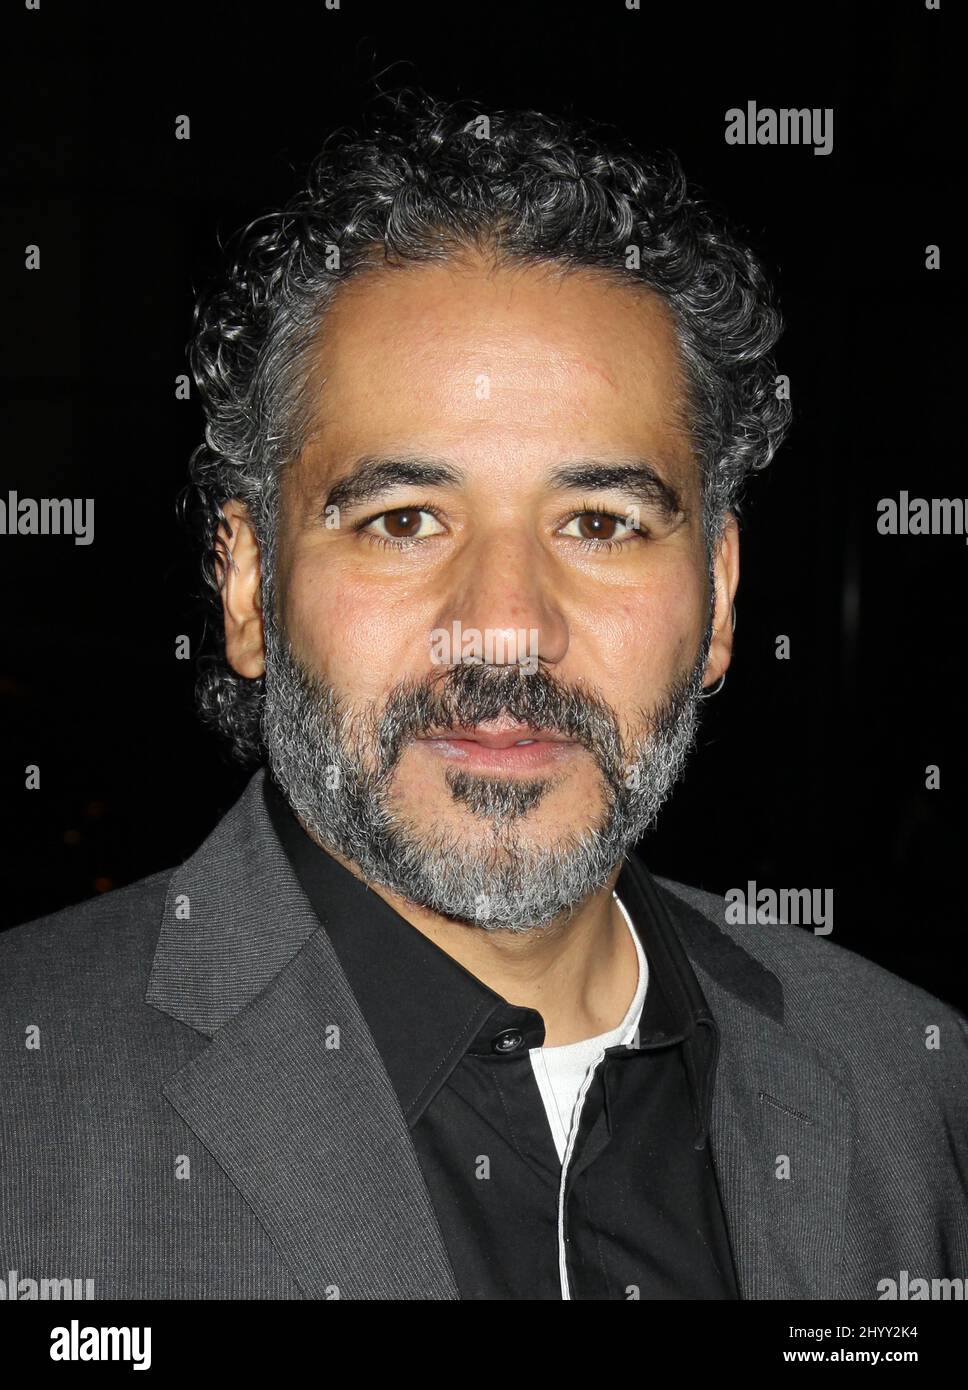 John Ortiz during the IFP's 20th Annual Gotham Independent Film Awards held at Cipriani, Wall Street, New York Stock Photo